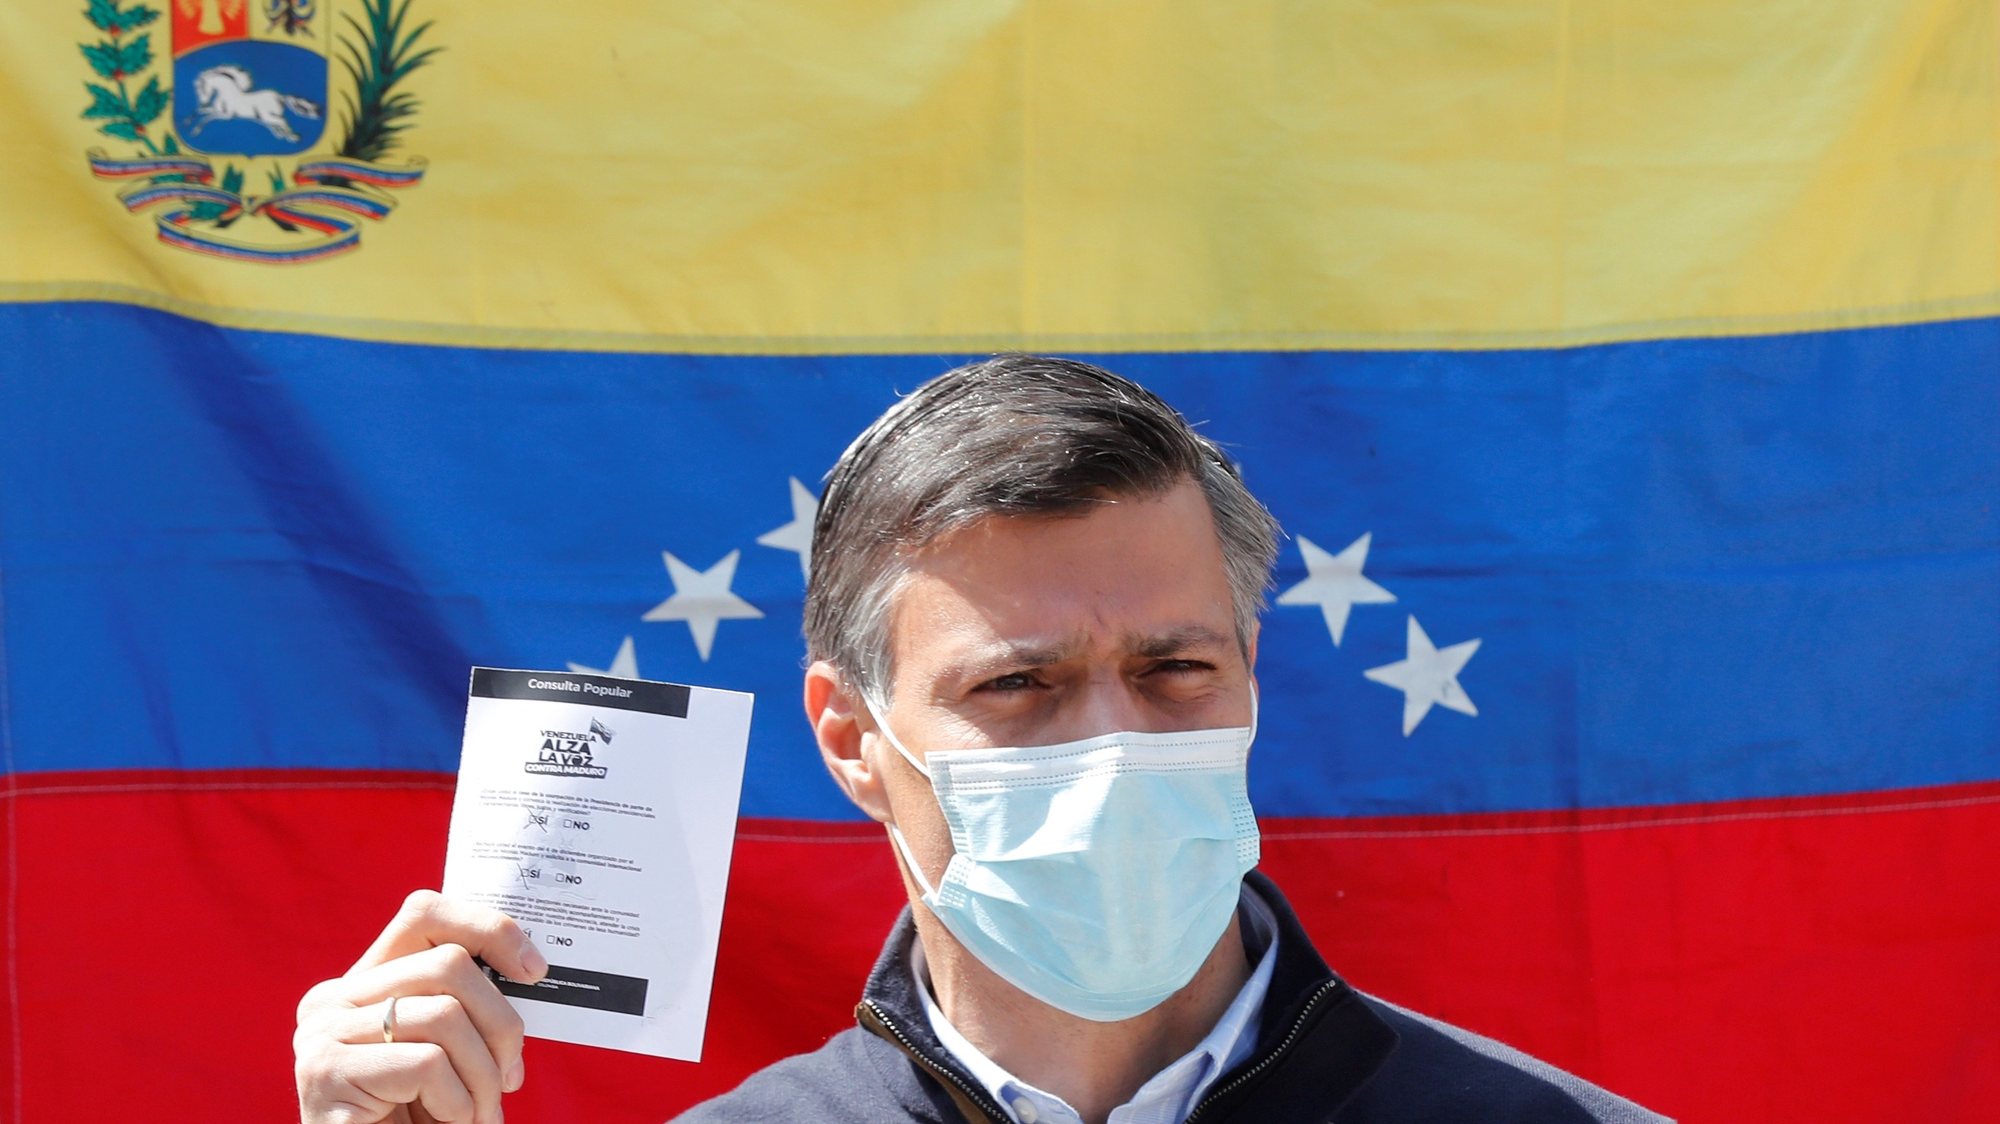 epa08879778 Venezuelan opposition leader Leopoldo Lopez votes in the popular consultation promoted by the president of the Parliament of Venezuela and opposition leader, Juan Guaido, from the Plaza de Bolivar in Bogota, Colombia, 12 December 2020. Lopez, who is visiting Colombia is seeking to strengthen the international front against Nicolas Maduro, voted in the opposition poll in rejection of the last legislative elections in Venezuela. The voting began on 07 December virtually through two applications, Voatz and Telegram, a format that remains open until the end of 12 December.  EPA/MAURICIO DUENAS CASTANEDA